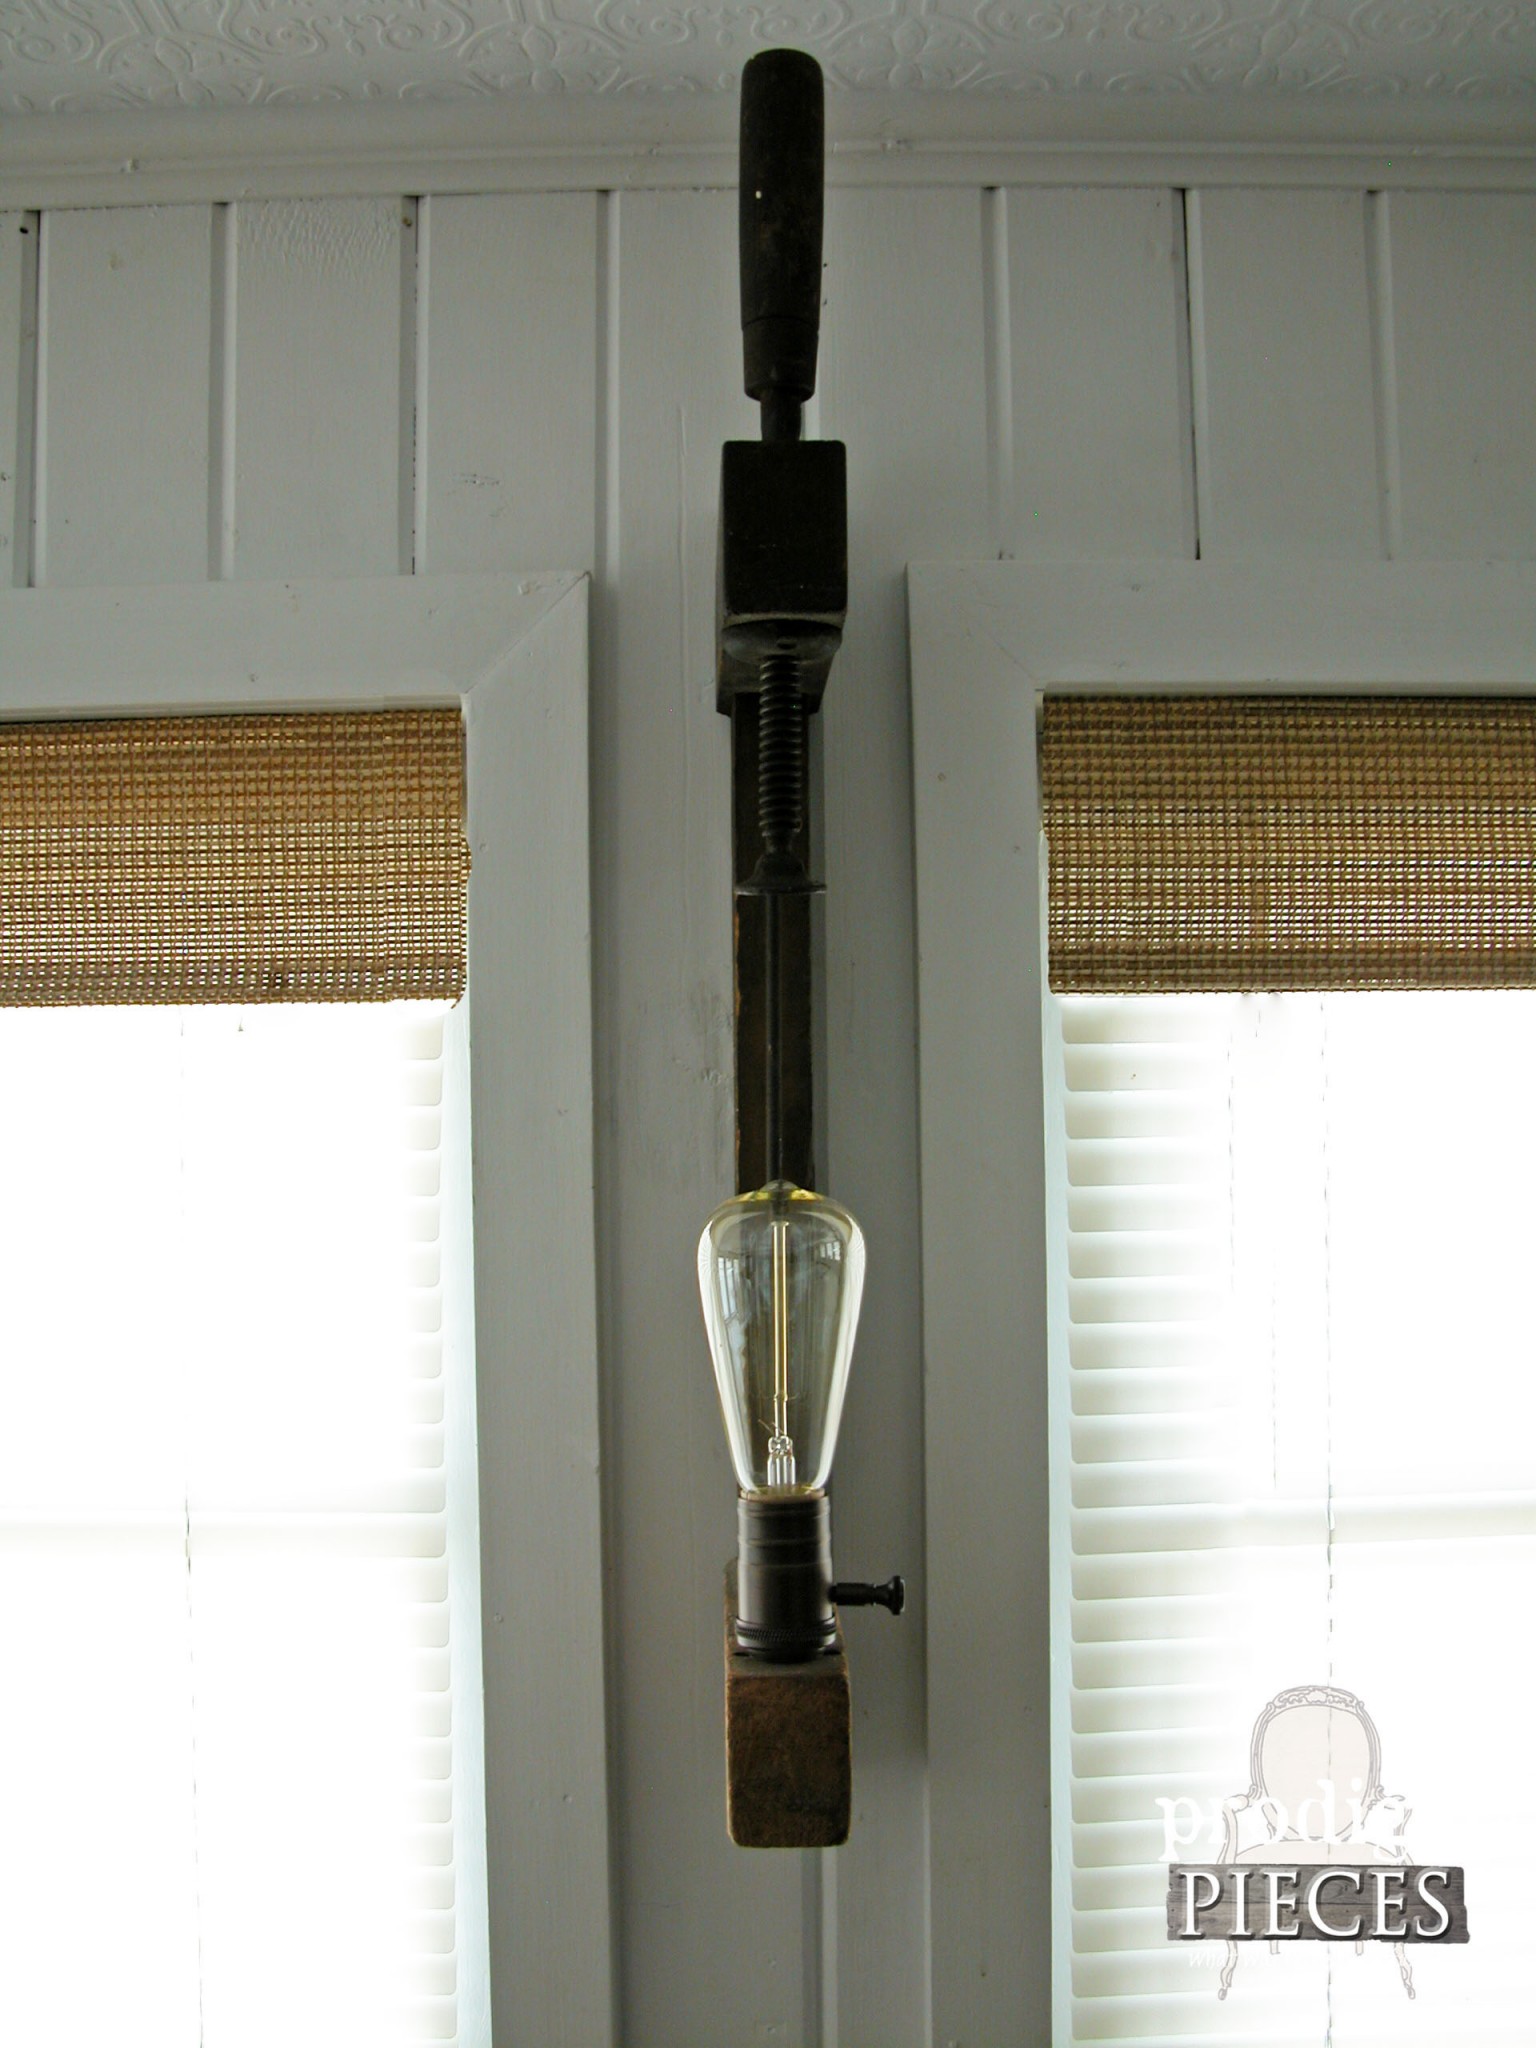 Upcycled Antique Wooden Clamp turned into Industrial Farmhouse Wall Sconce by Prodigal Pieces | www.prodigalpieces.com